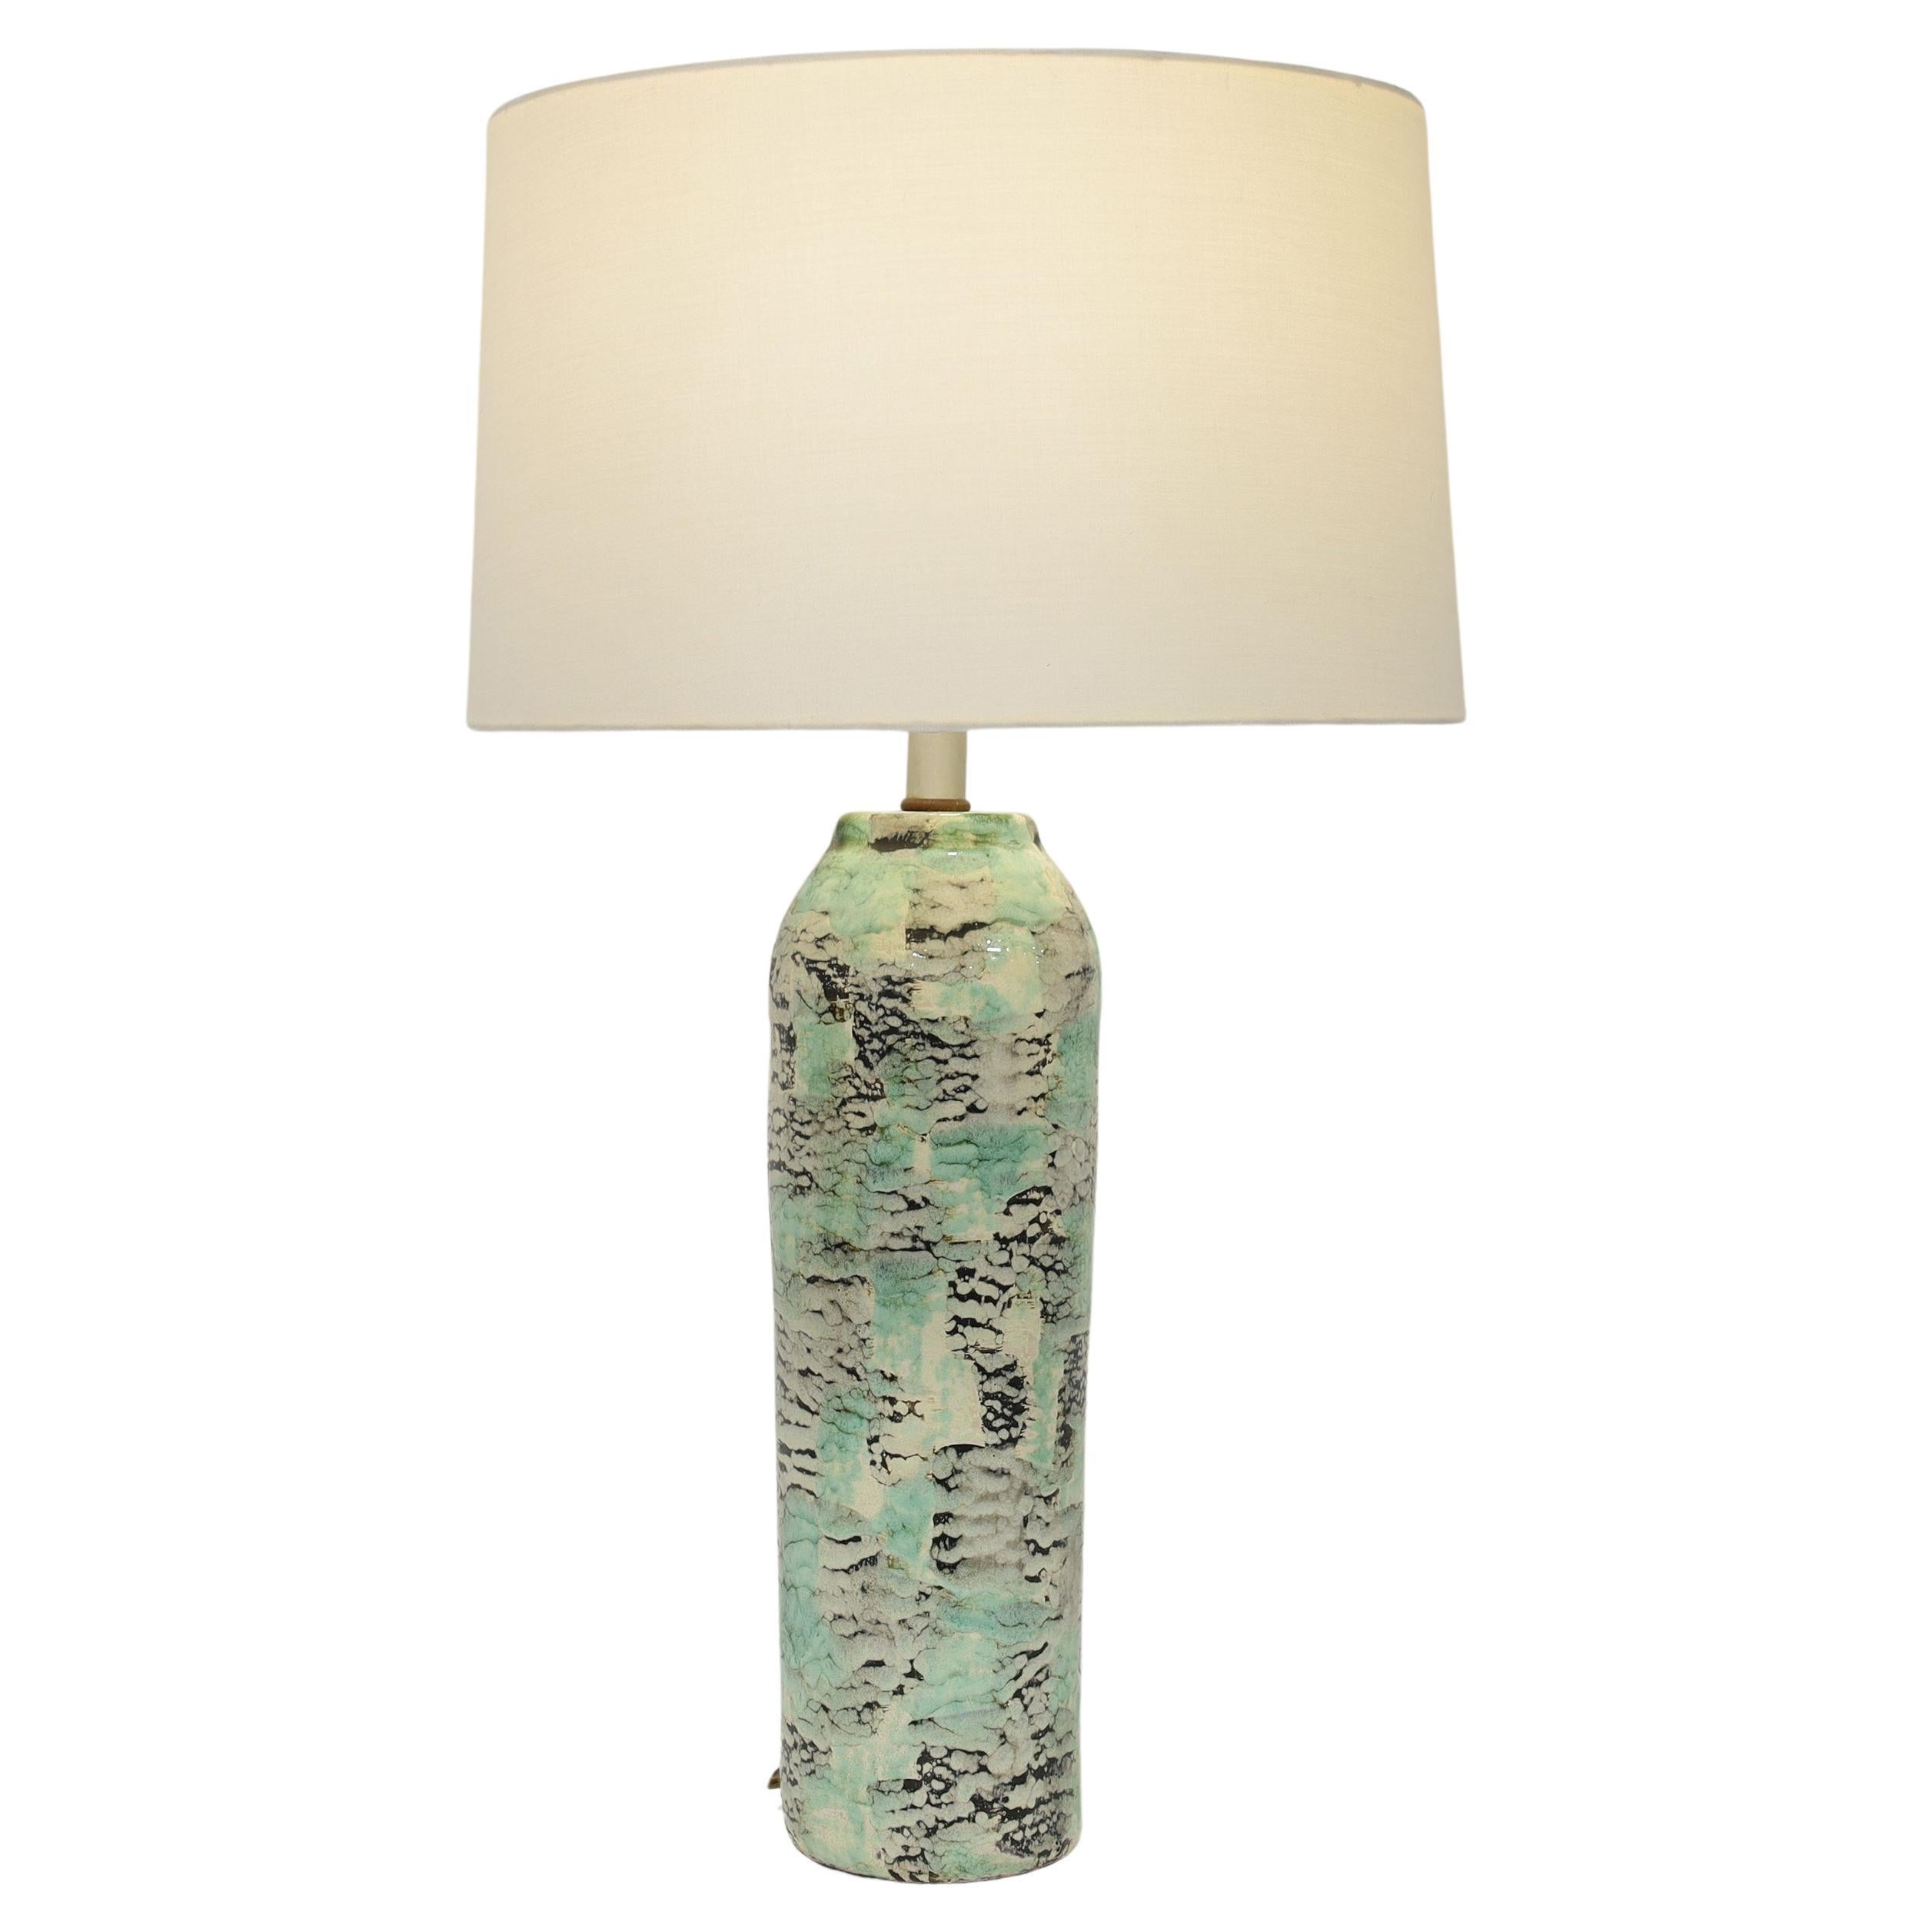 Kelby Ceramic Table Lamp in Black, Green and Off-White Abstract Pattern For Sale